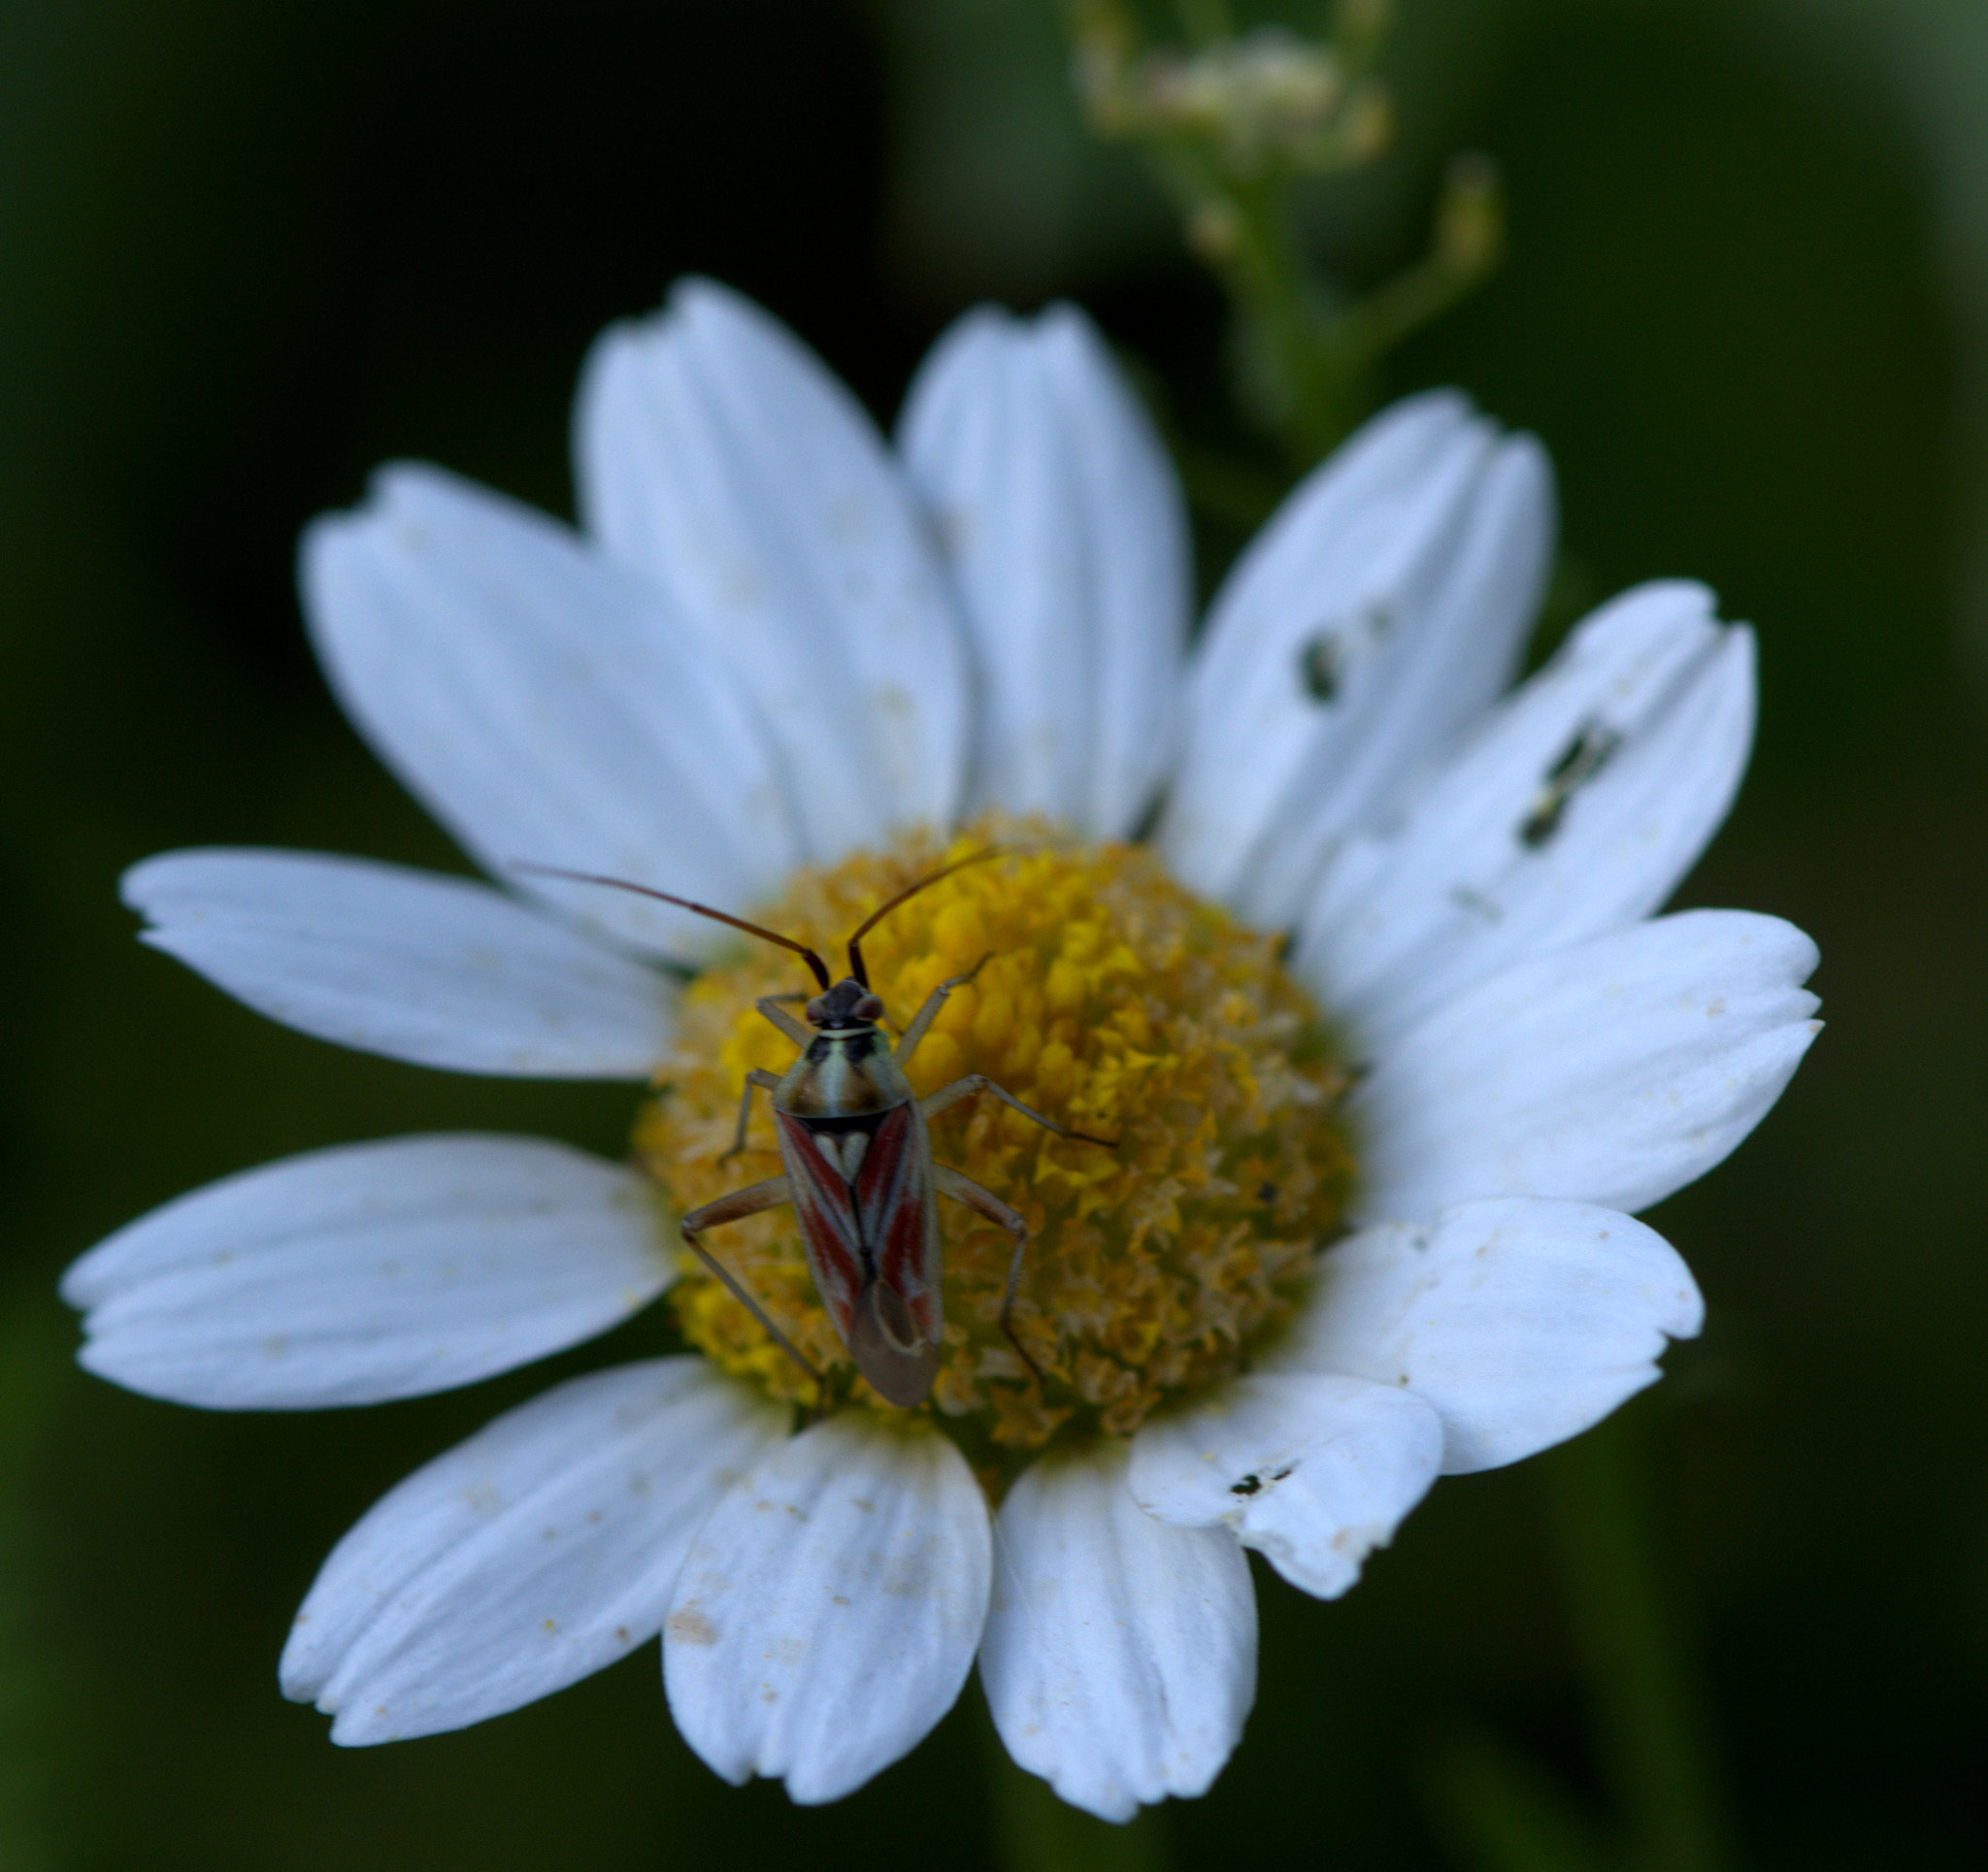 Nikon D5200 sample photo. Insect photography